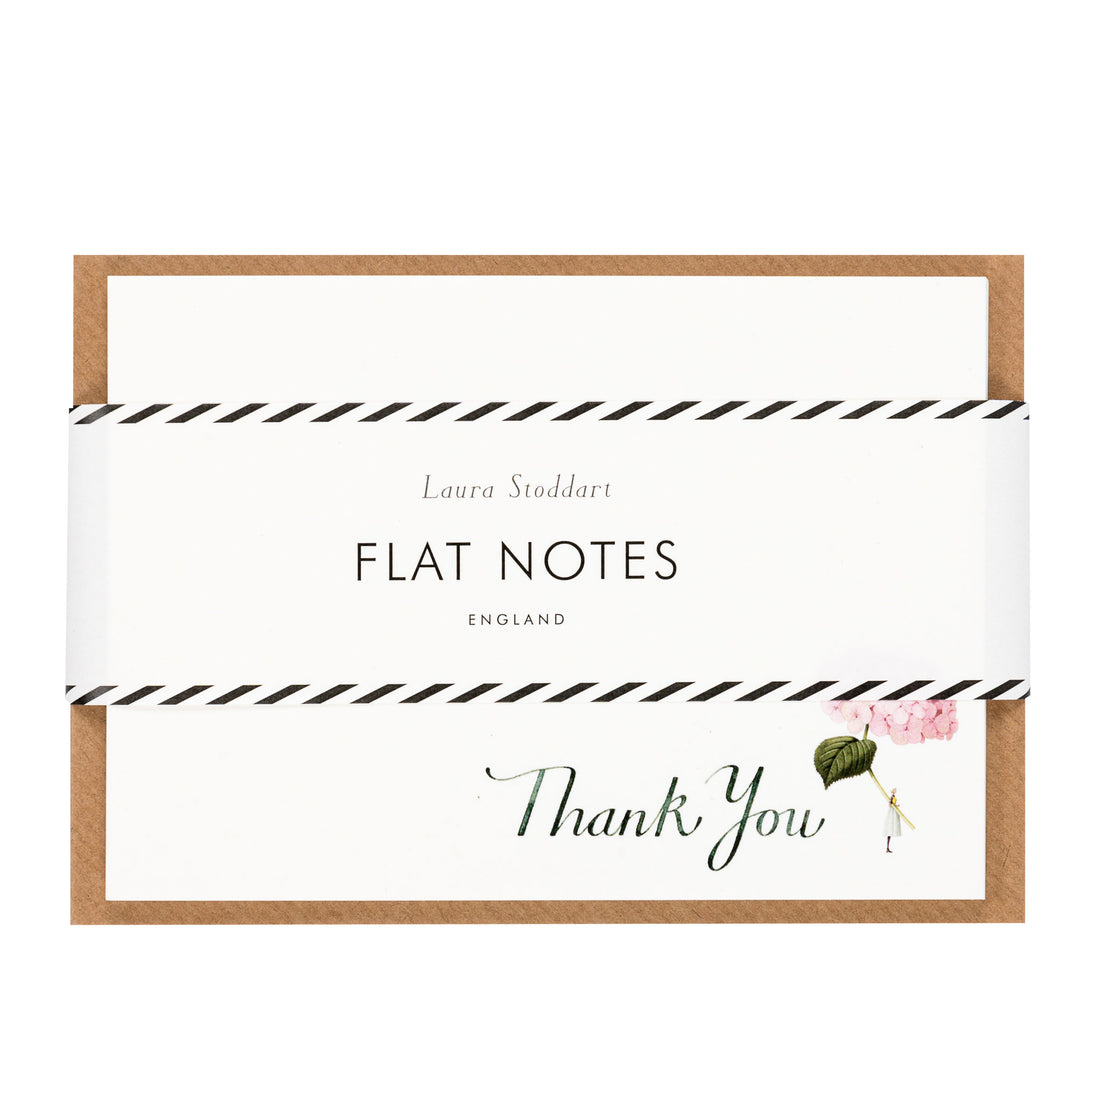 FLAT NOTES -  (PINK FLOWERS) THANK YOU